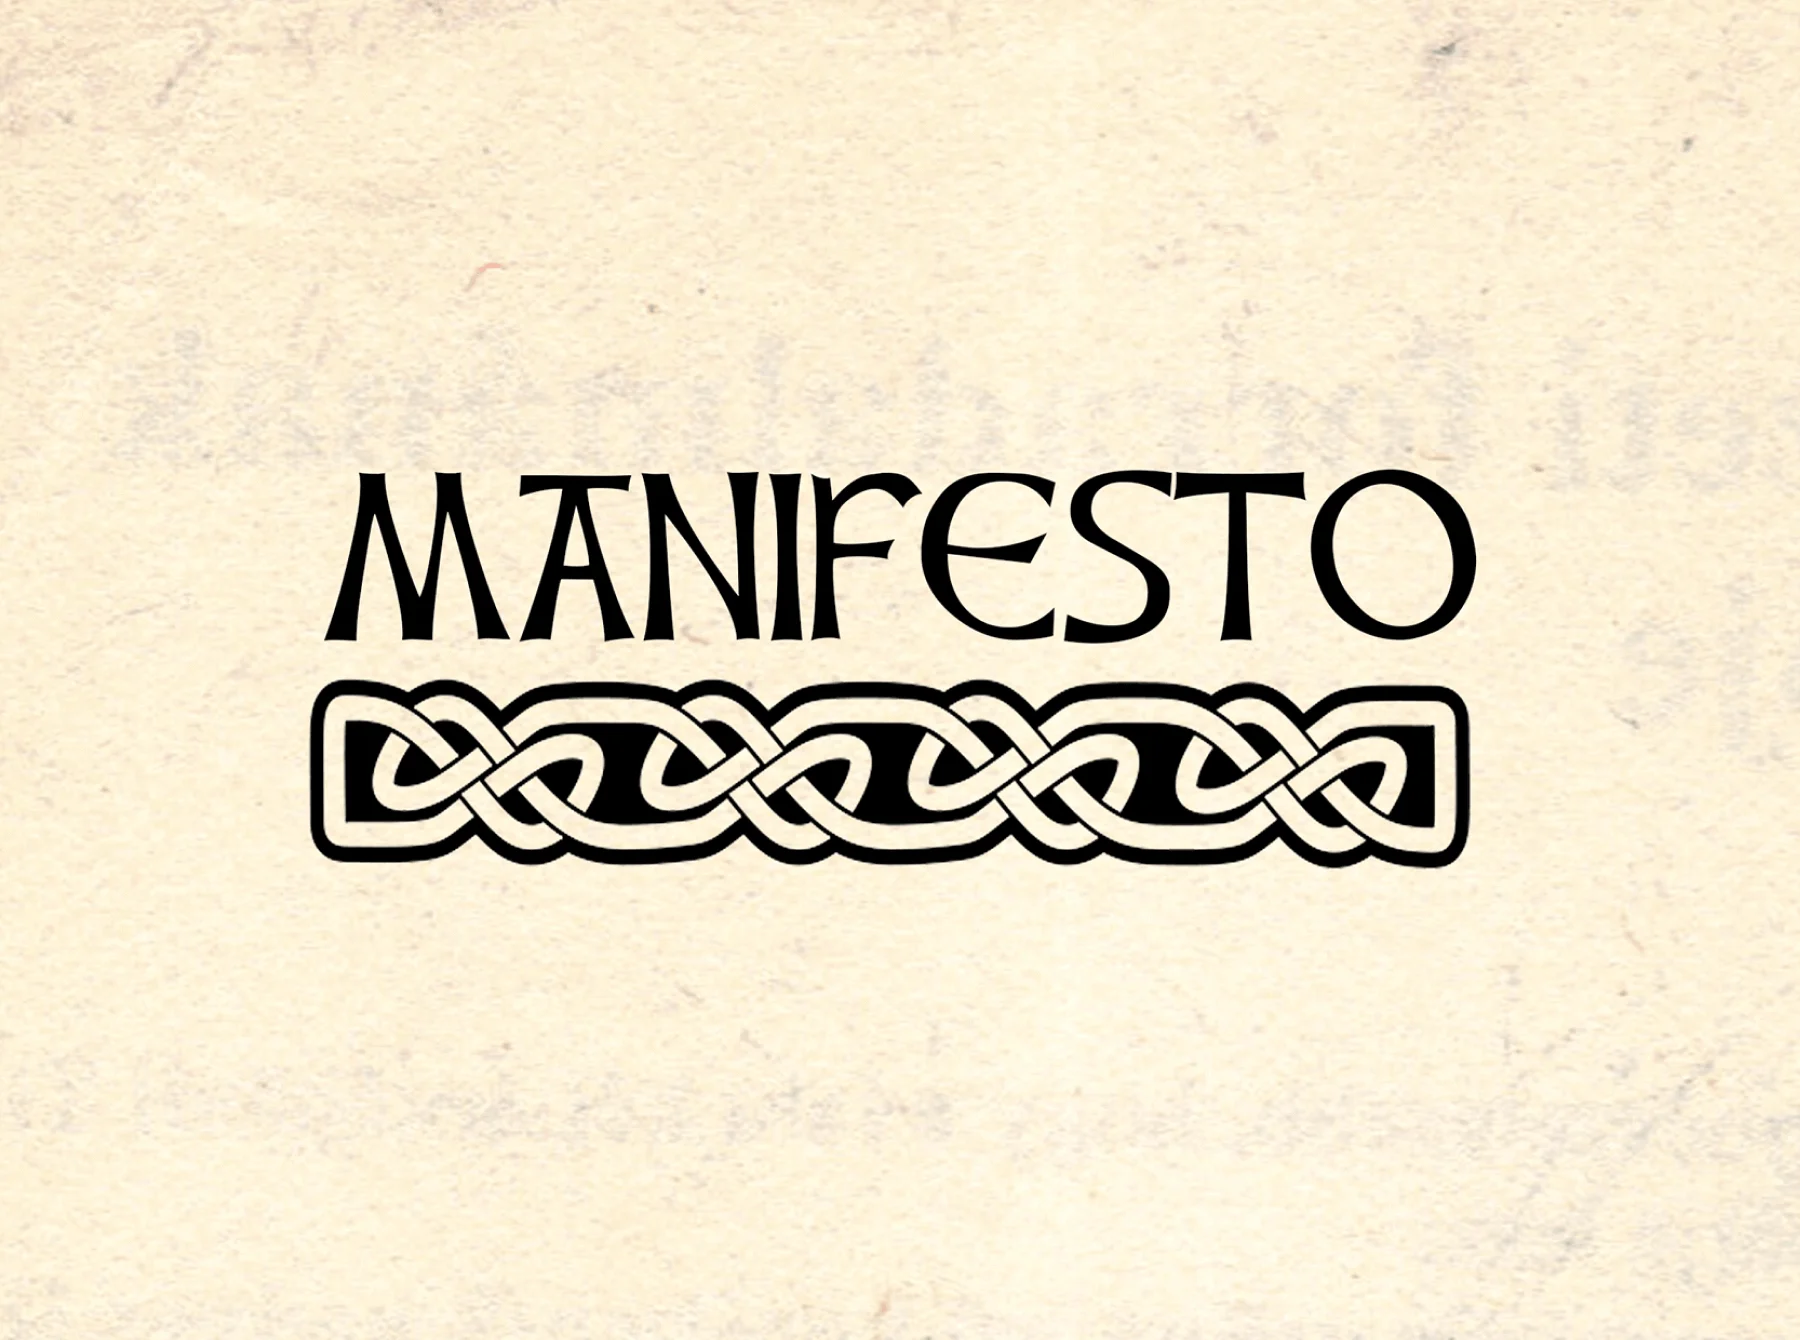 A Manifesto by Fontaines D.C.